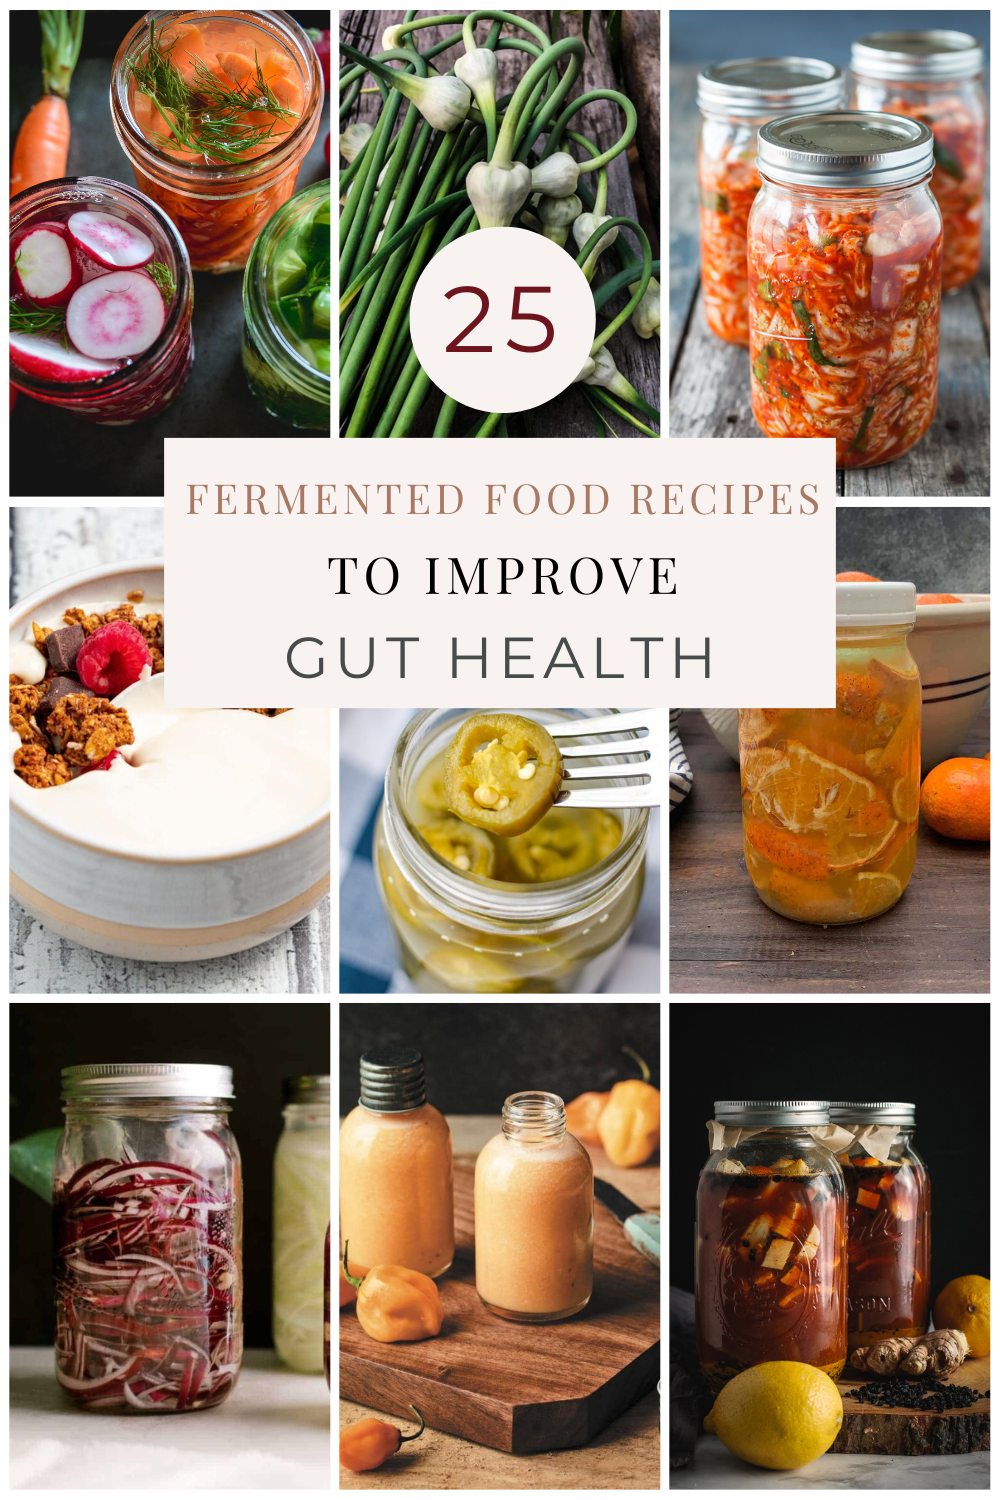 Fermented foods for overall wellbeing